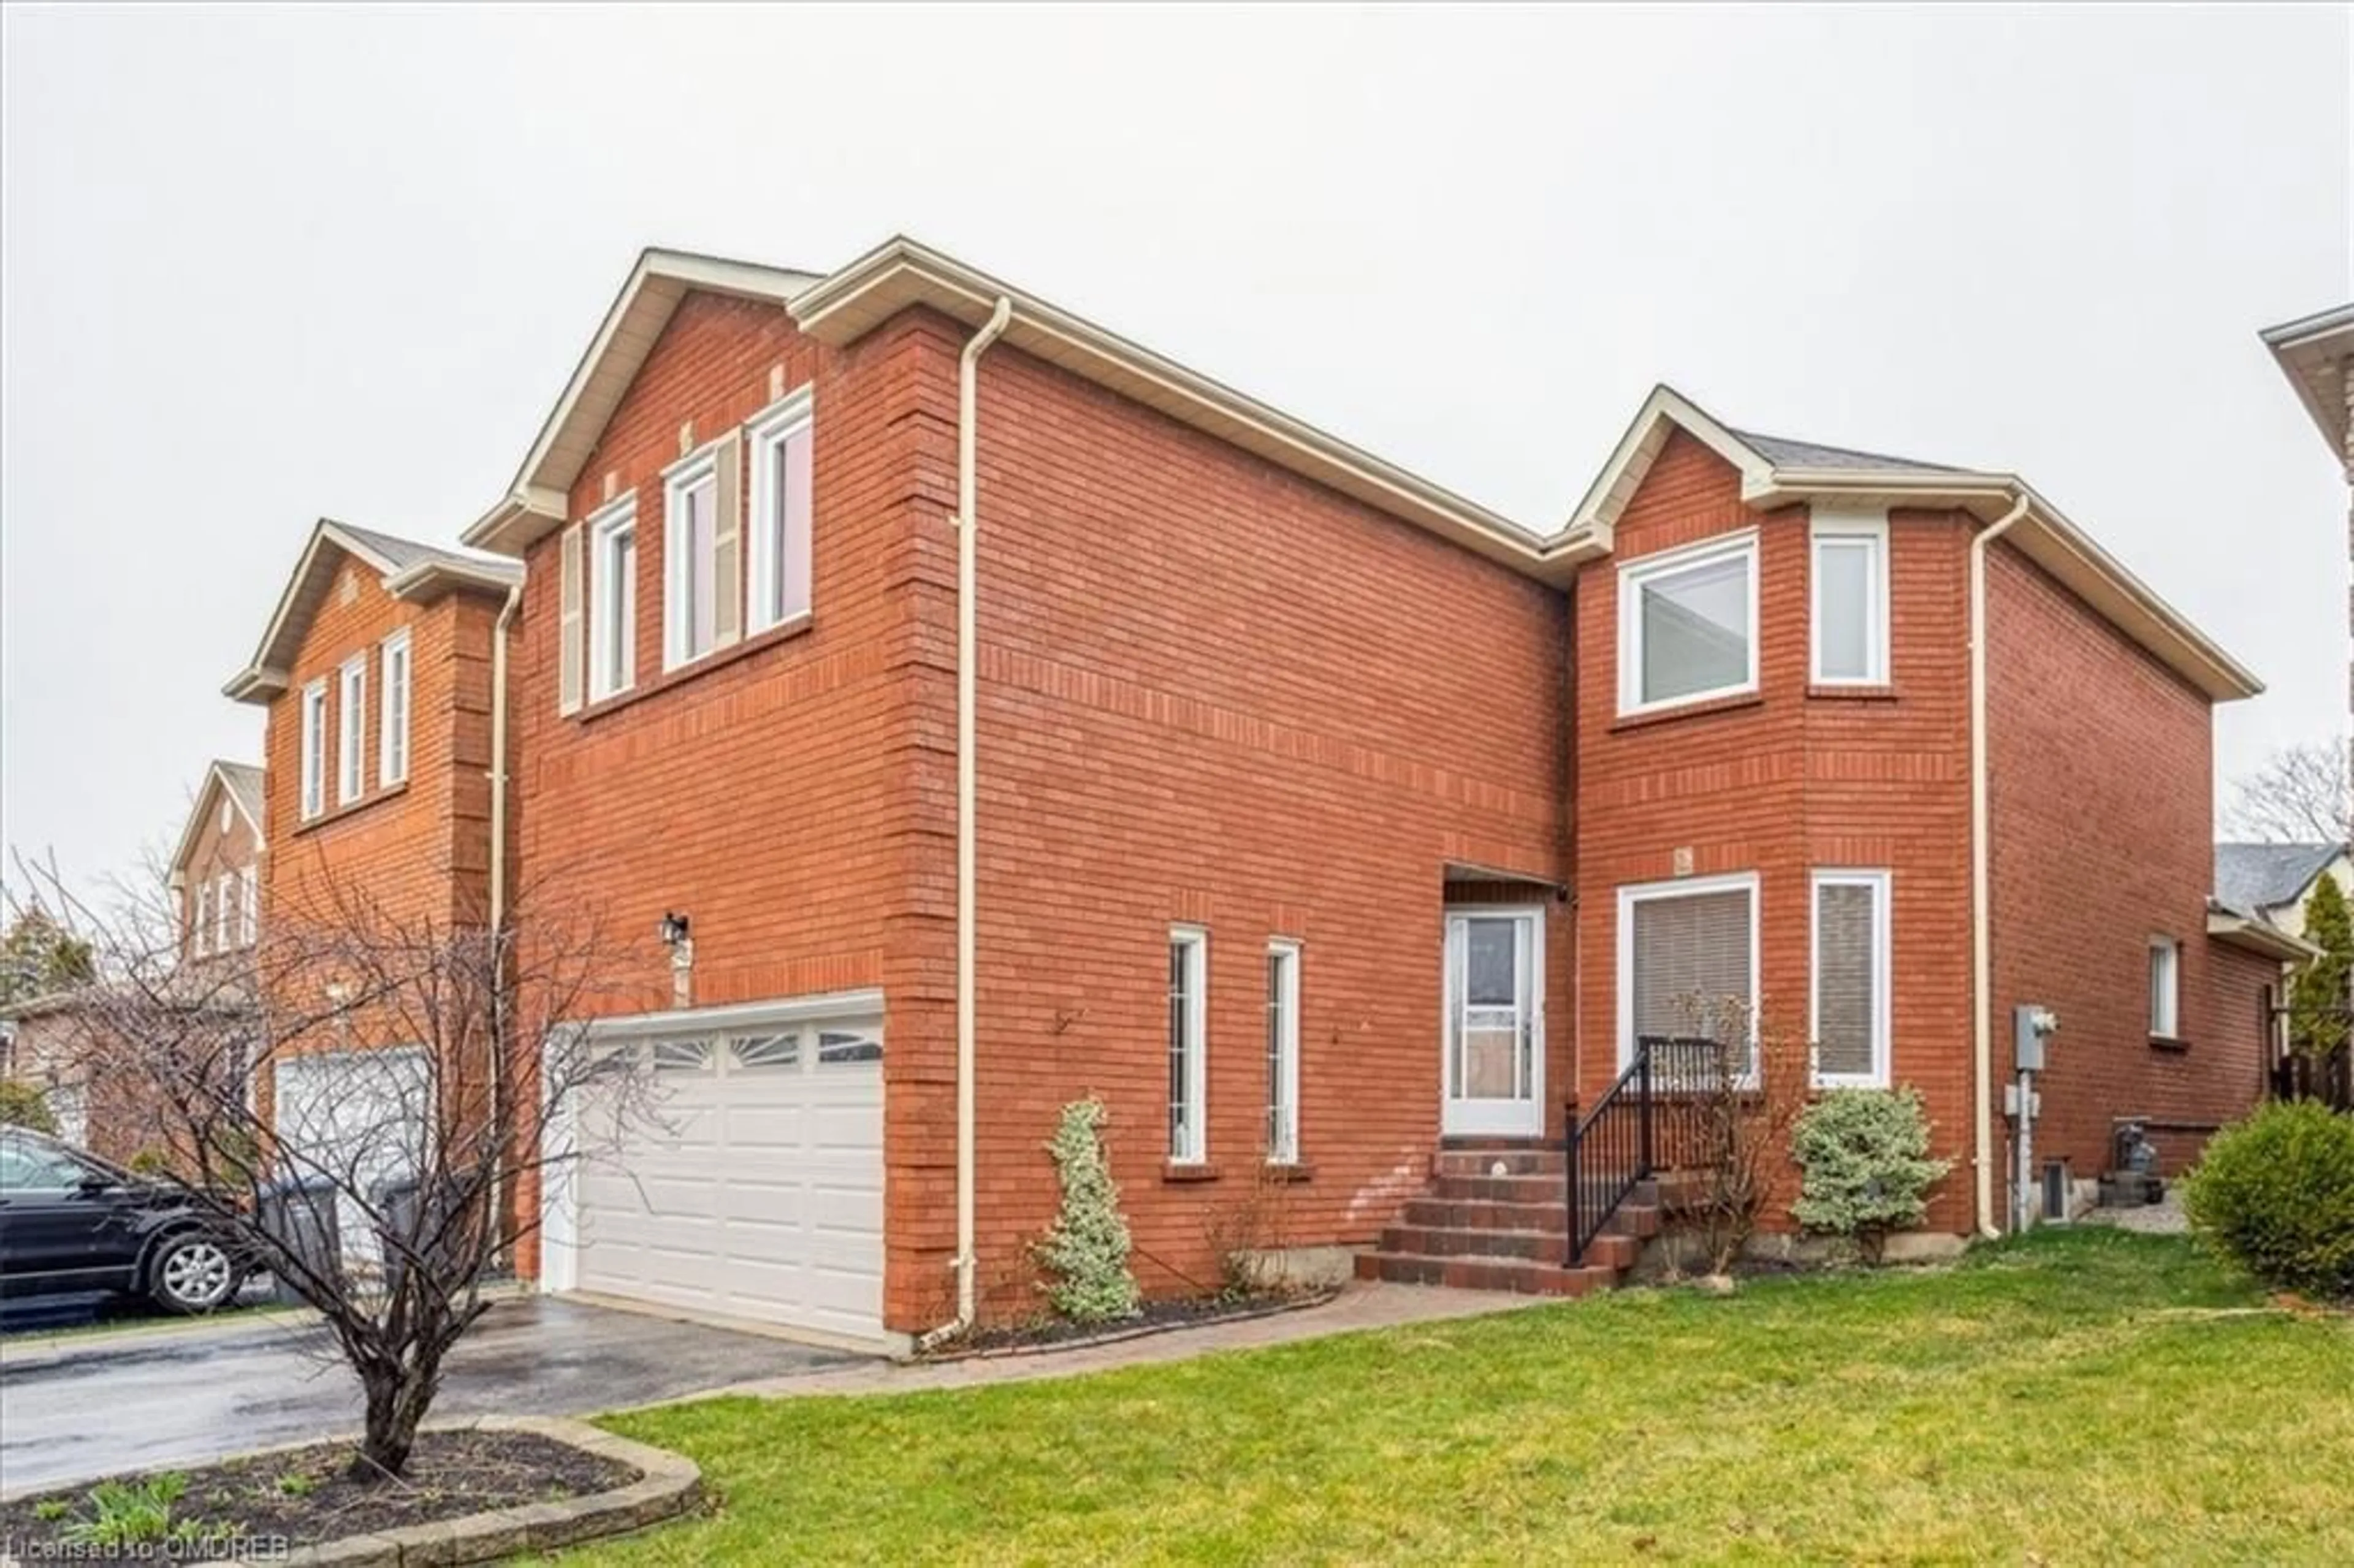 Home with brick exterior material for 6525 Warbler Lane, Mississauga Ontario L5N 6E1